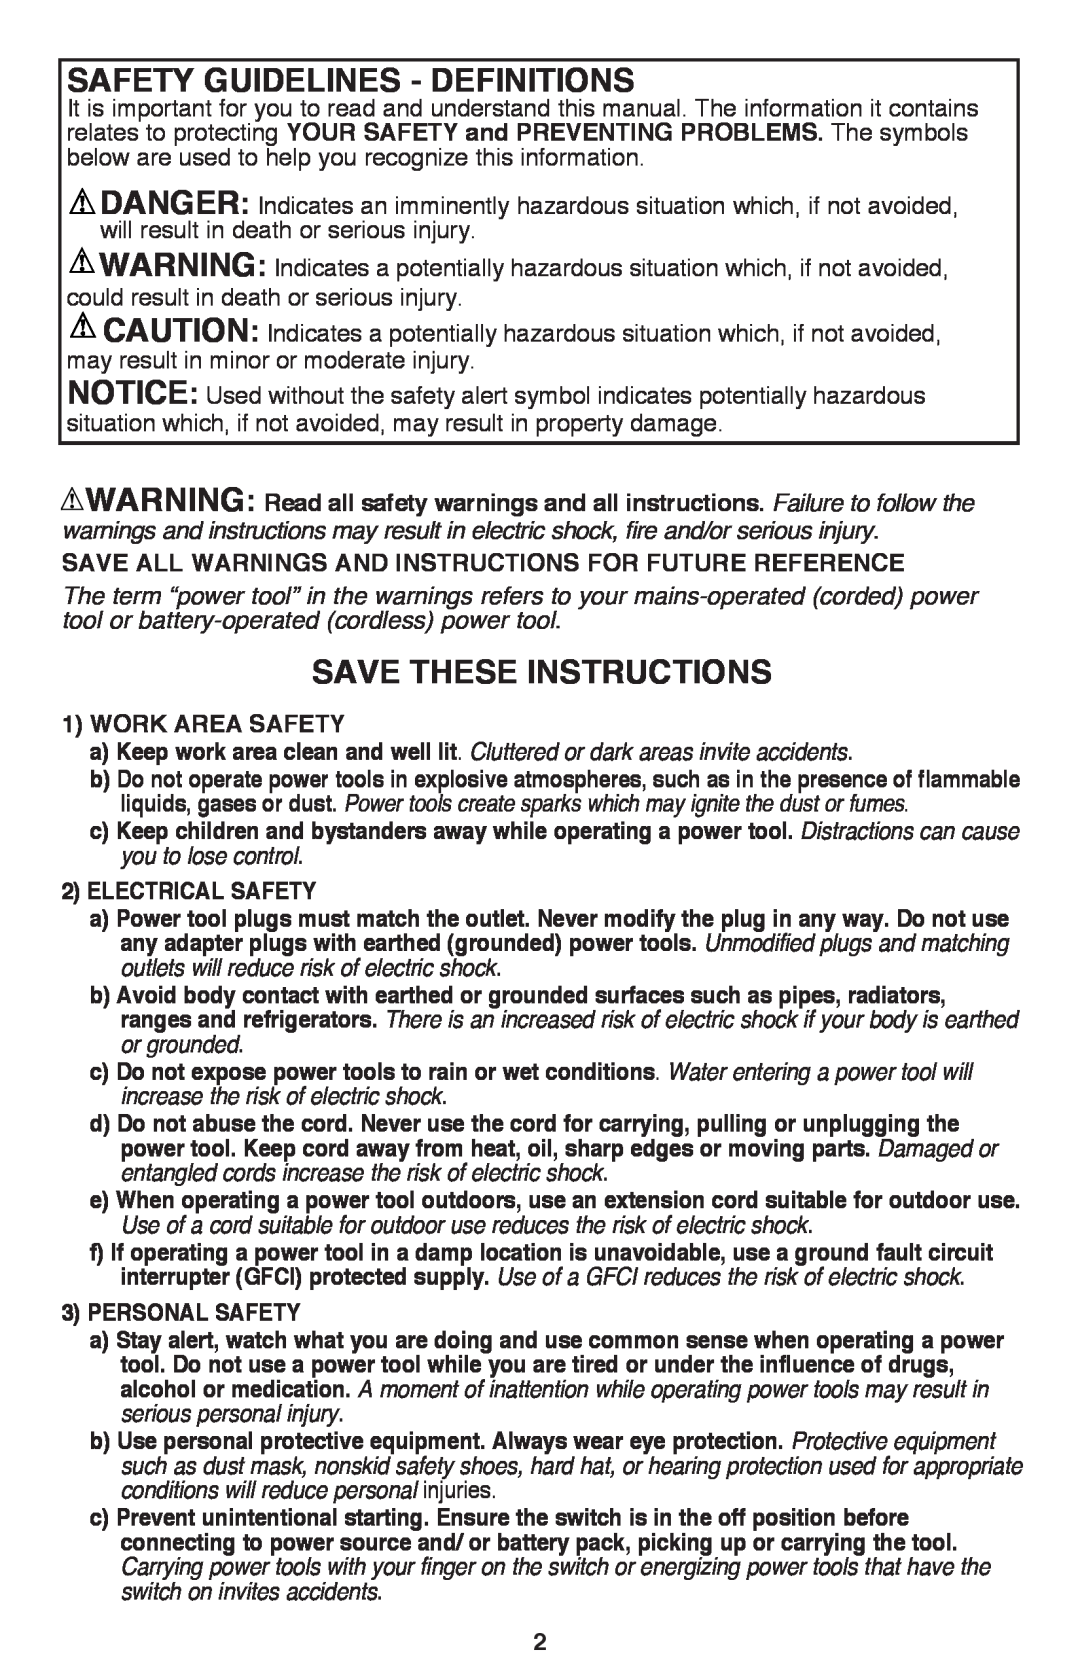 Black & Decker BDCF20, BDCF12 manual Safety Guidelines - Definitions, Save these instructions 